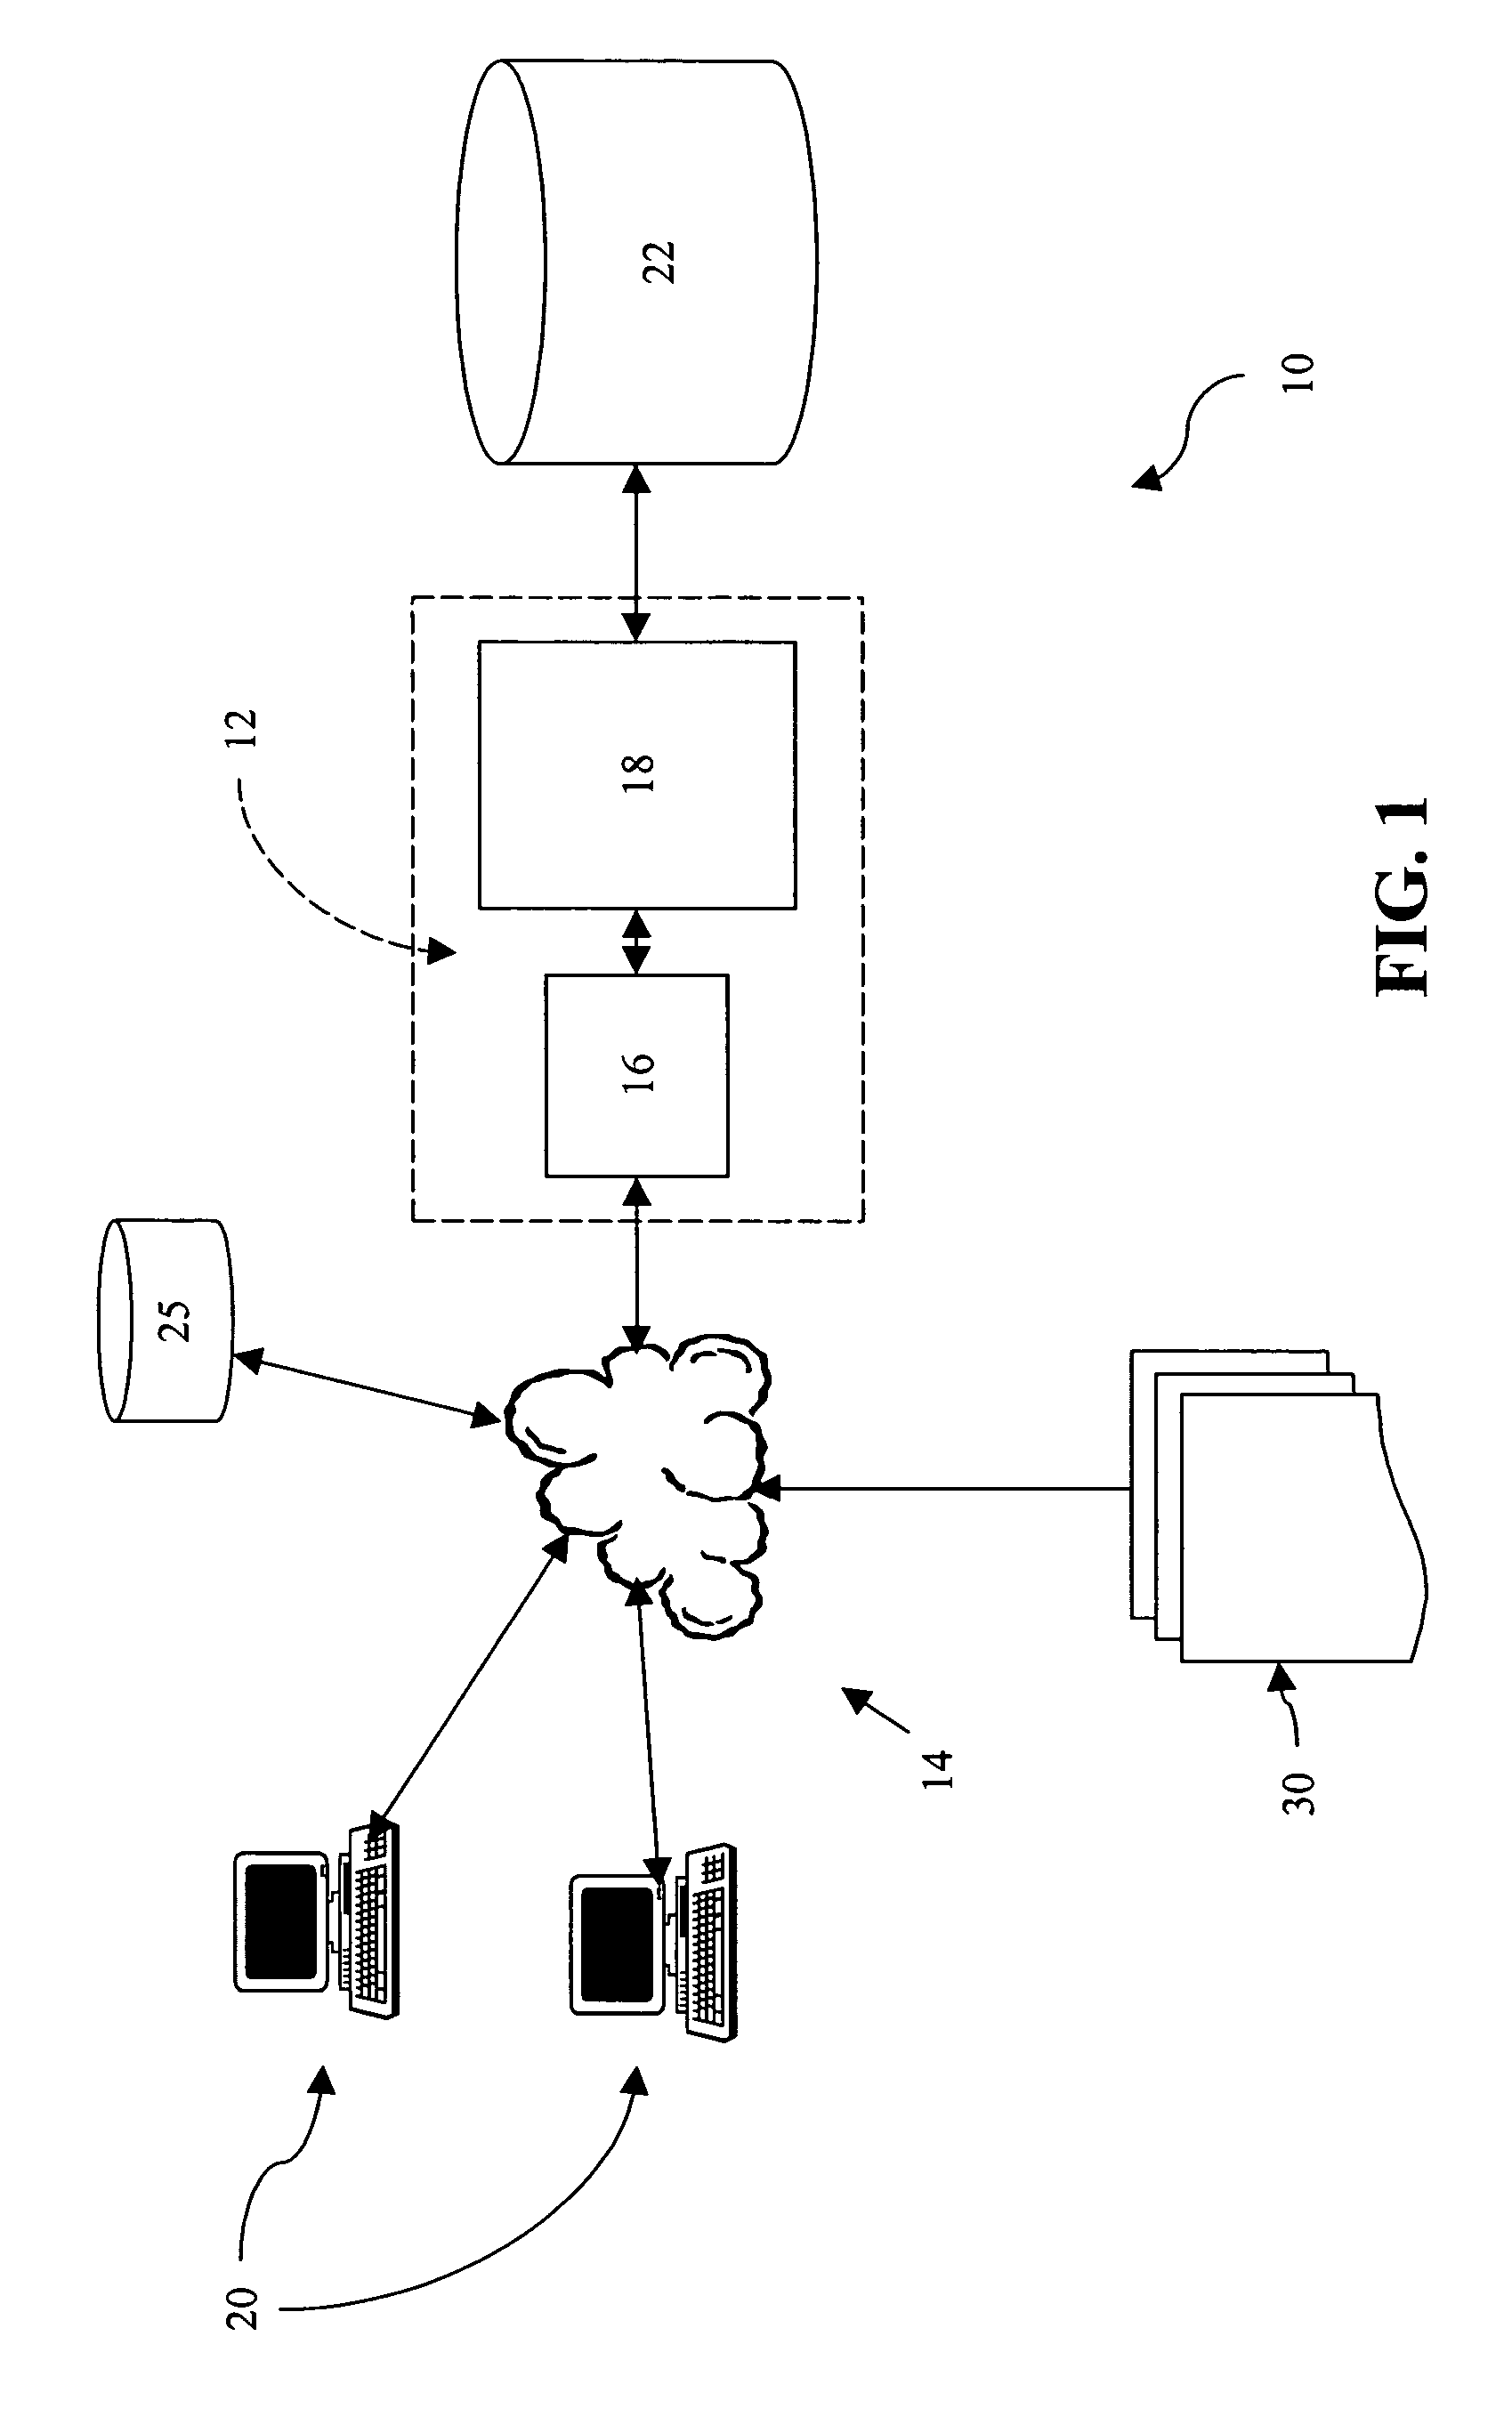 Language translation system and method using specialized dictionaries